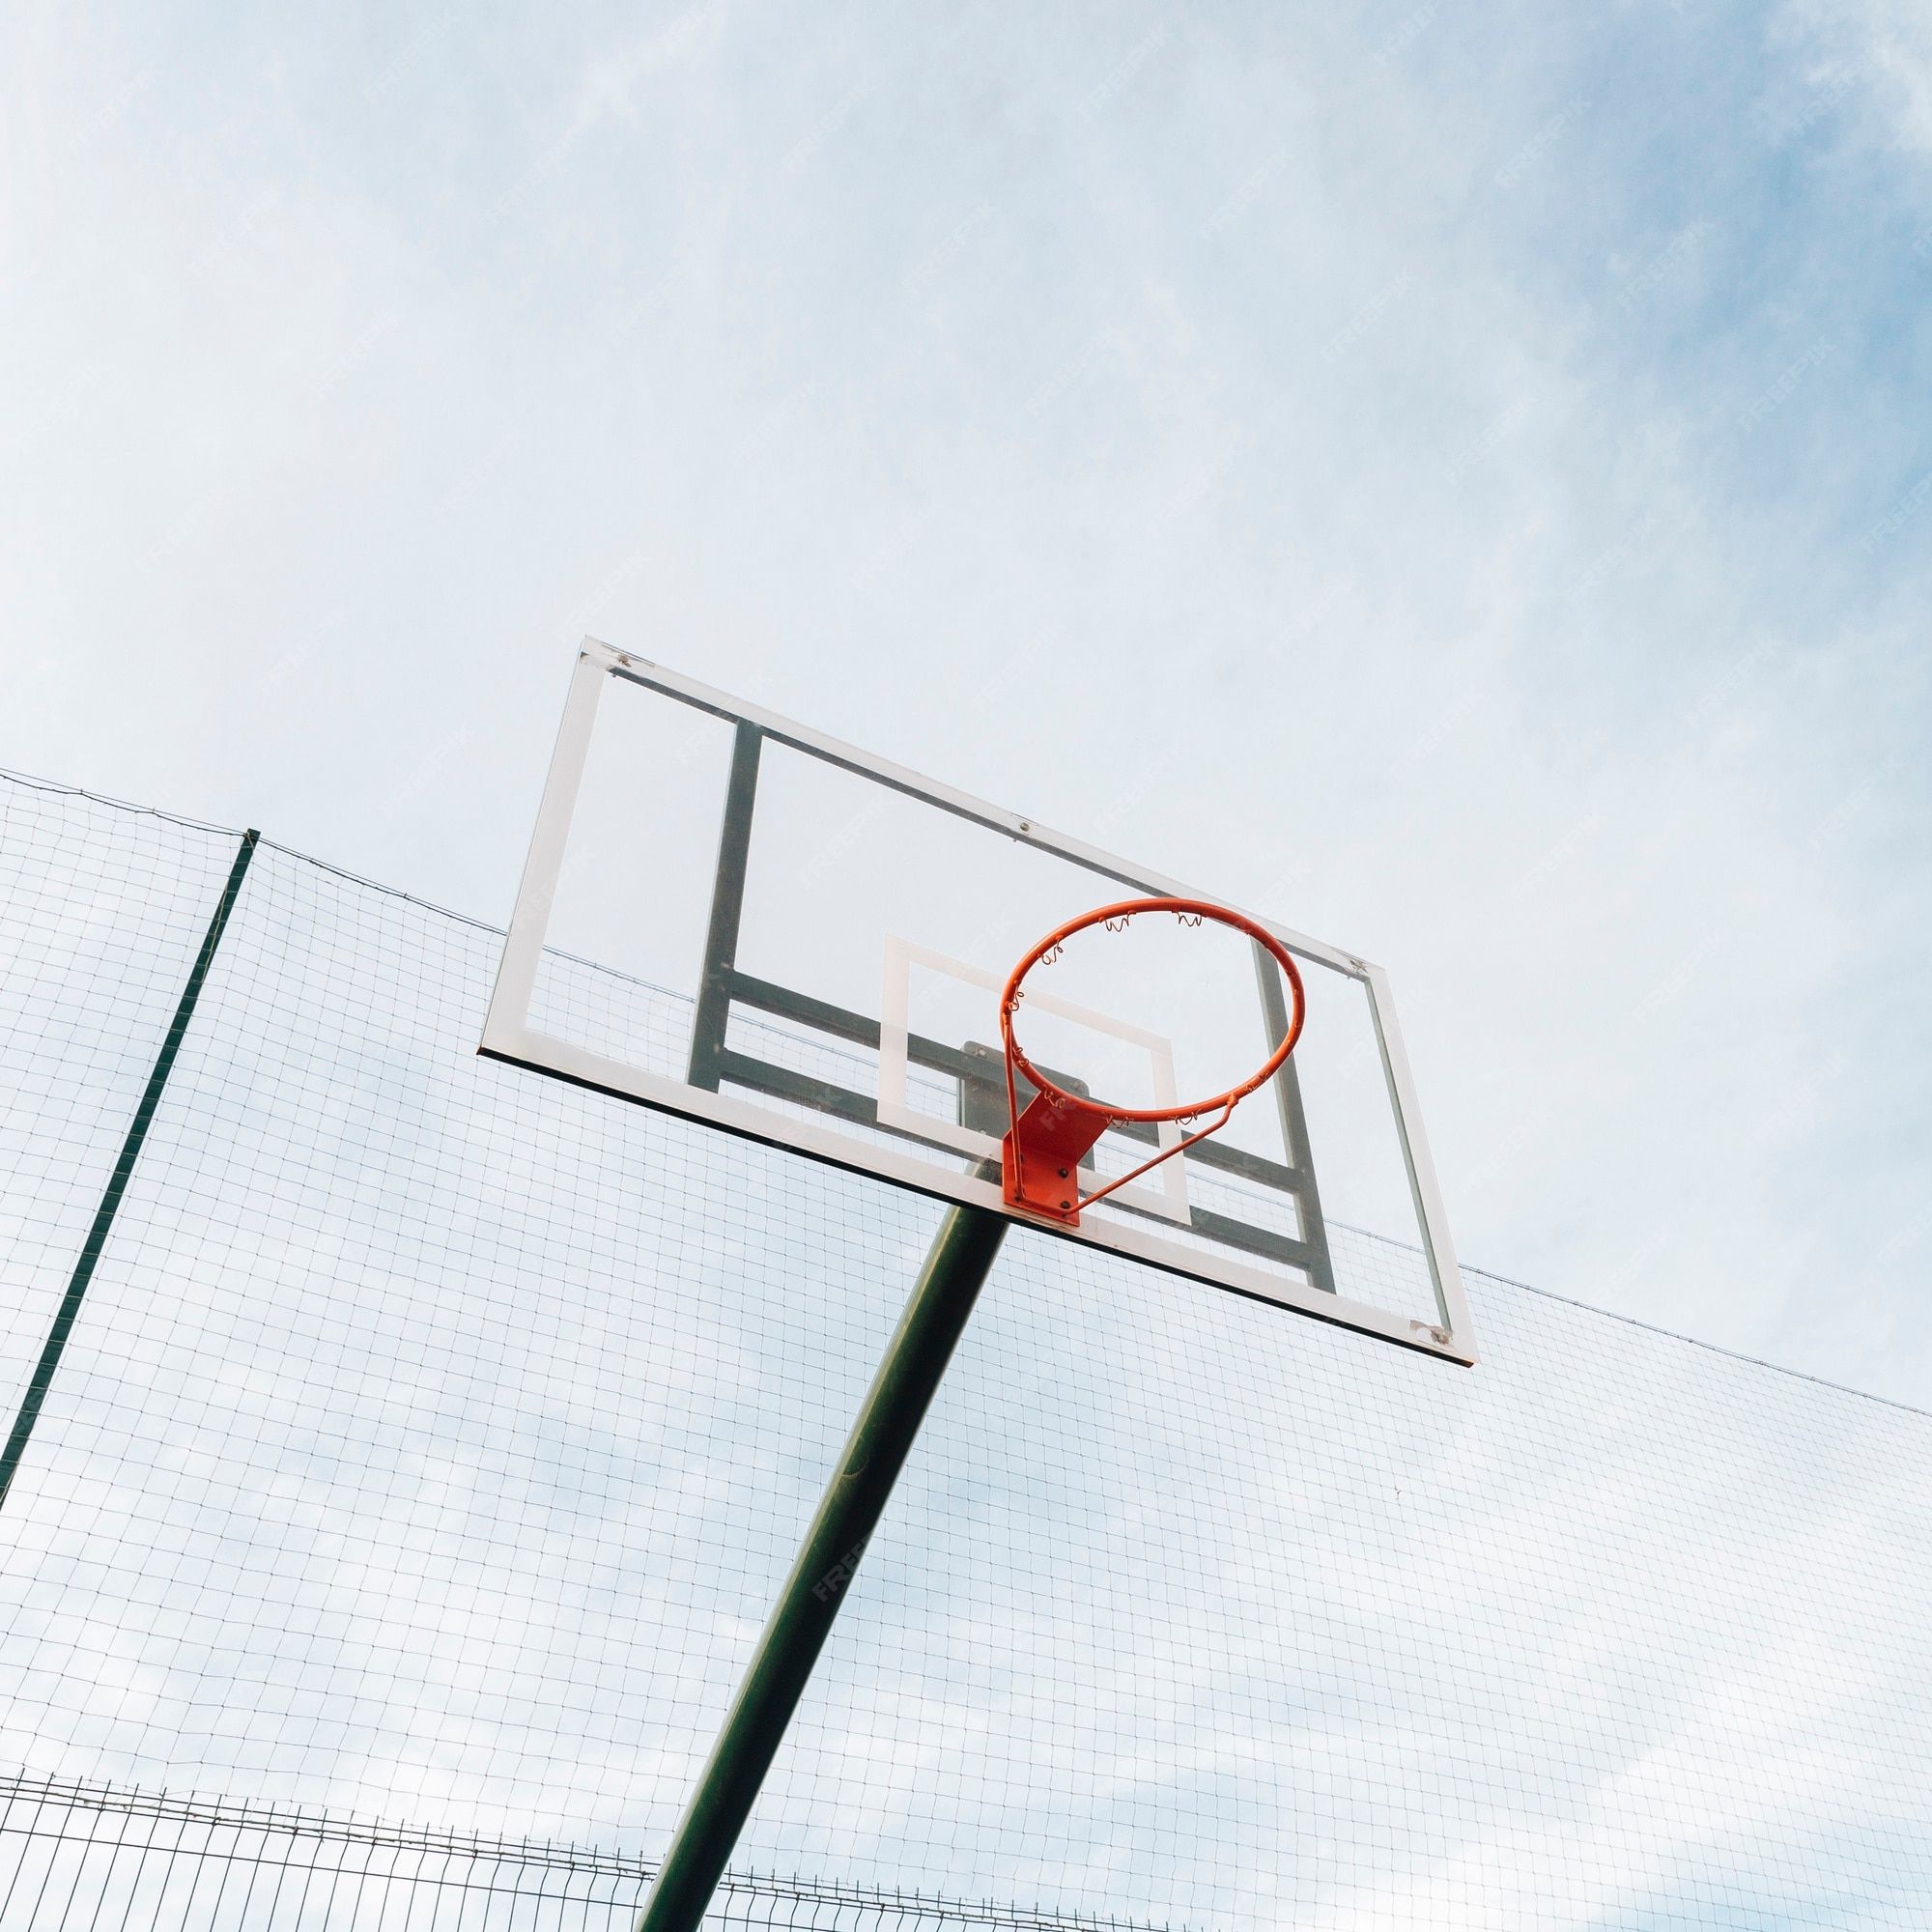 Free Photo. Basketball hoop and net on fence with sky view